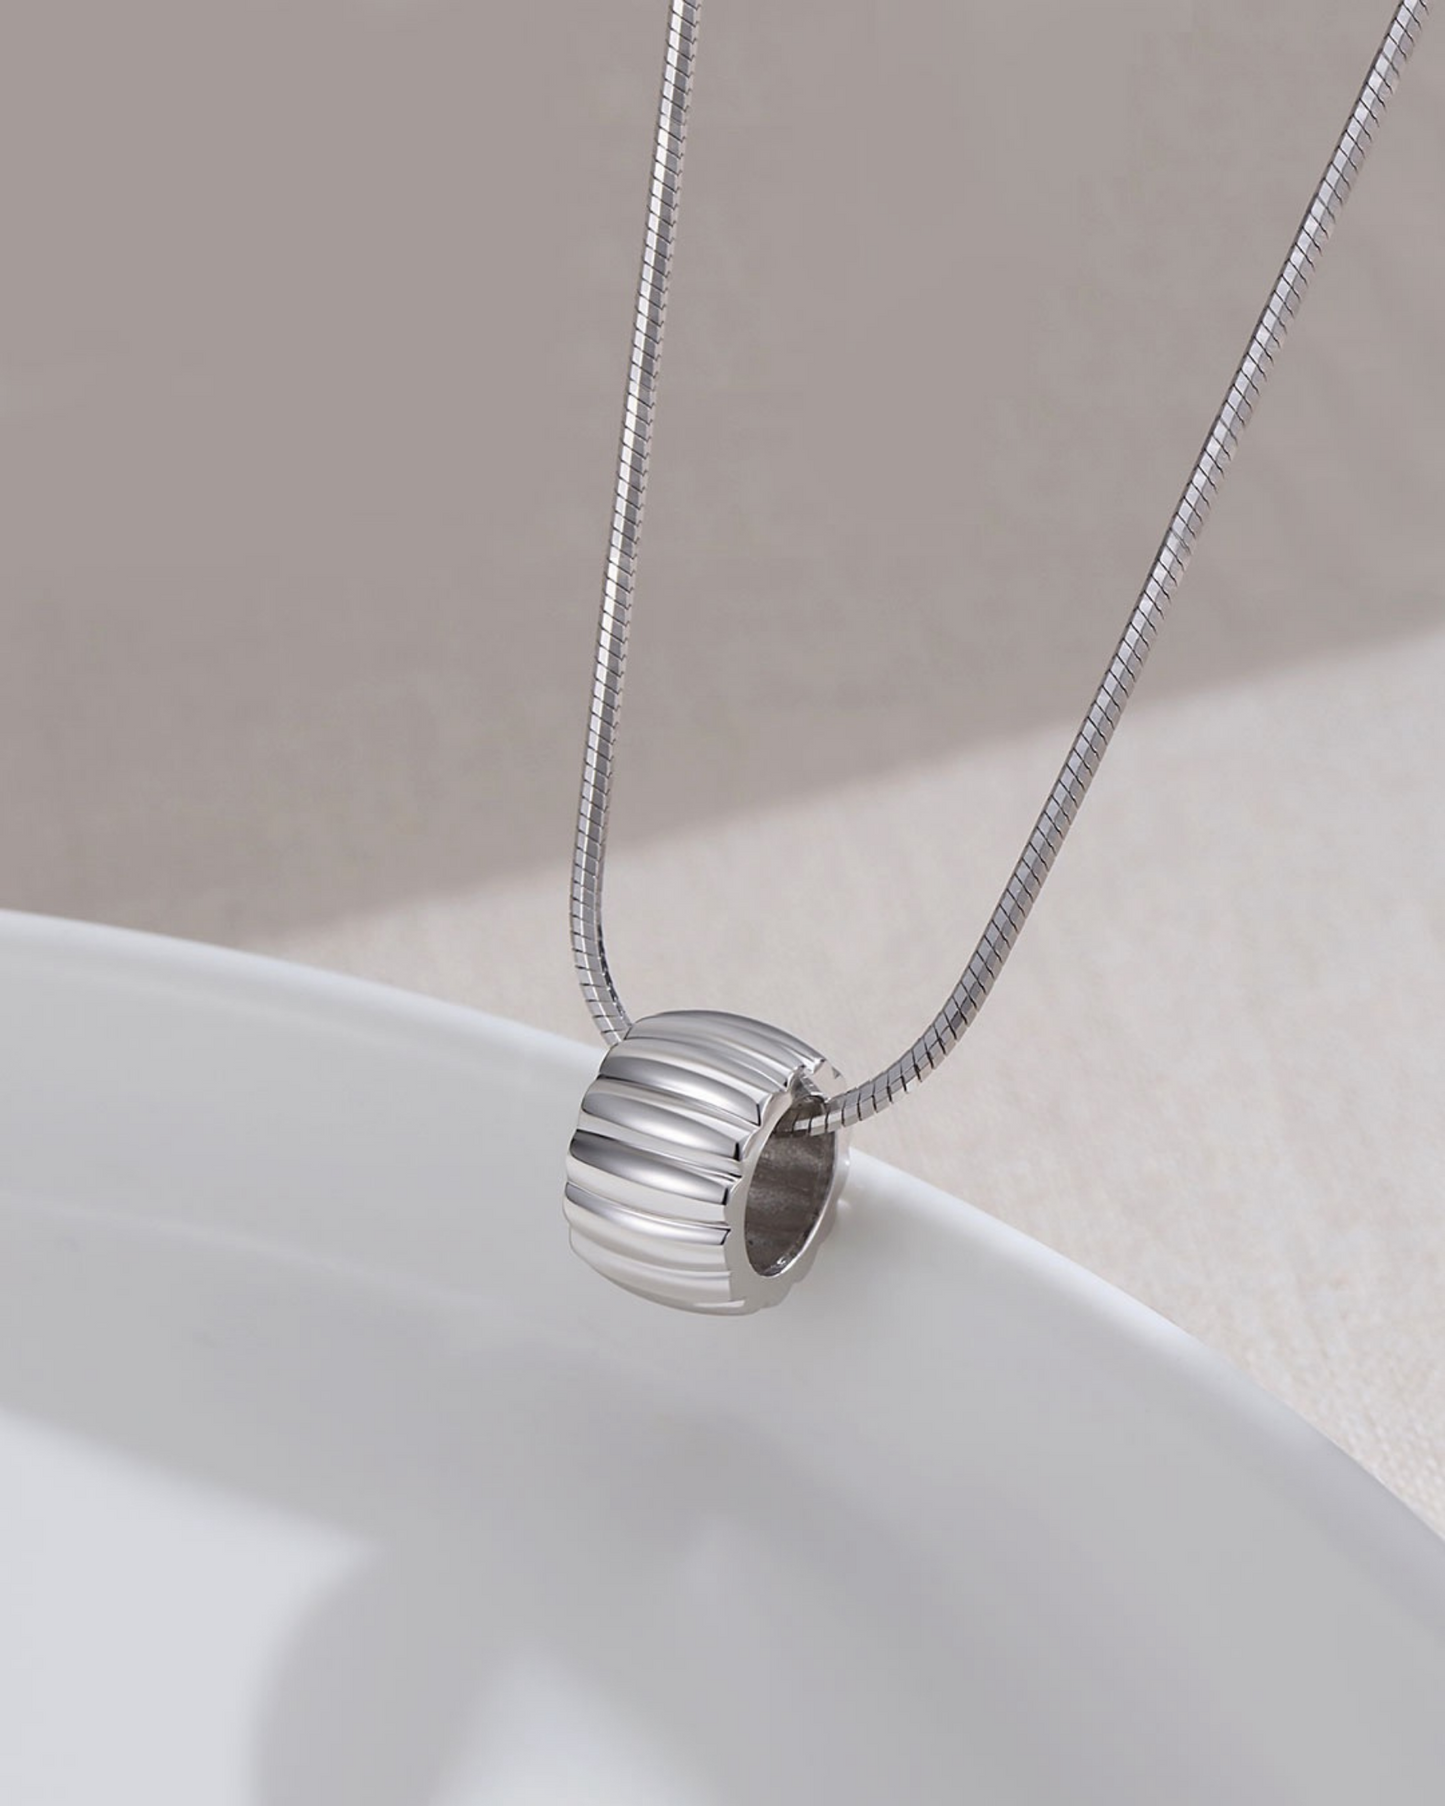 Silver Ring Pendant Necklace